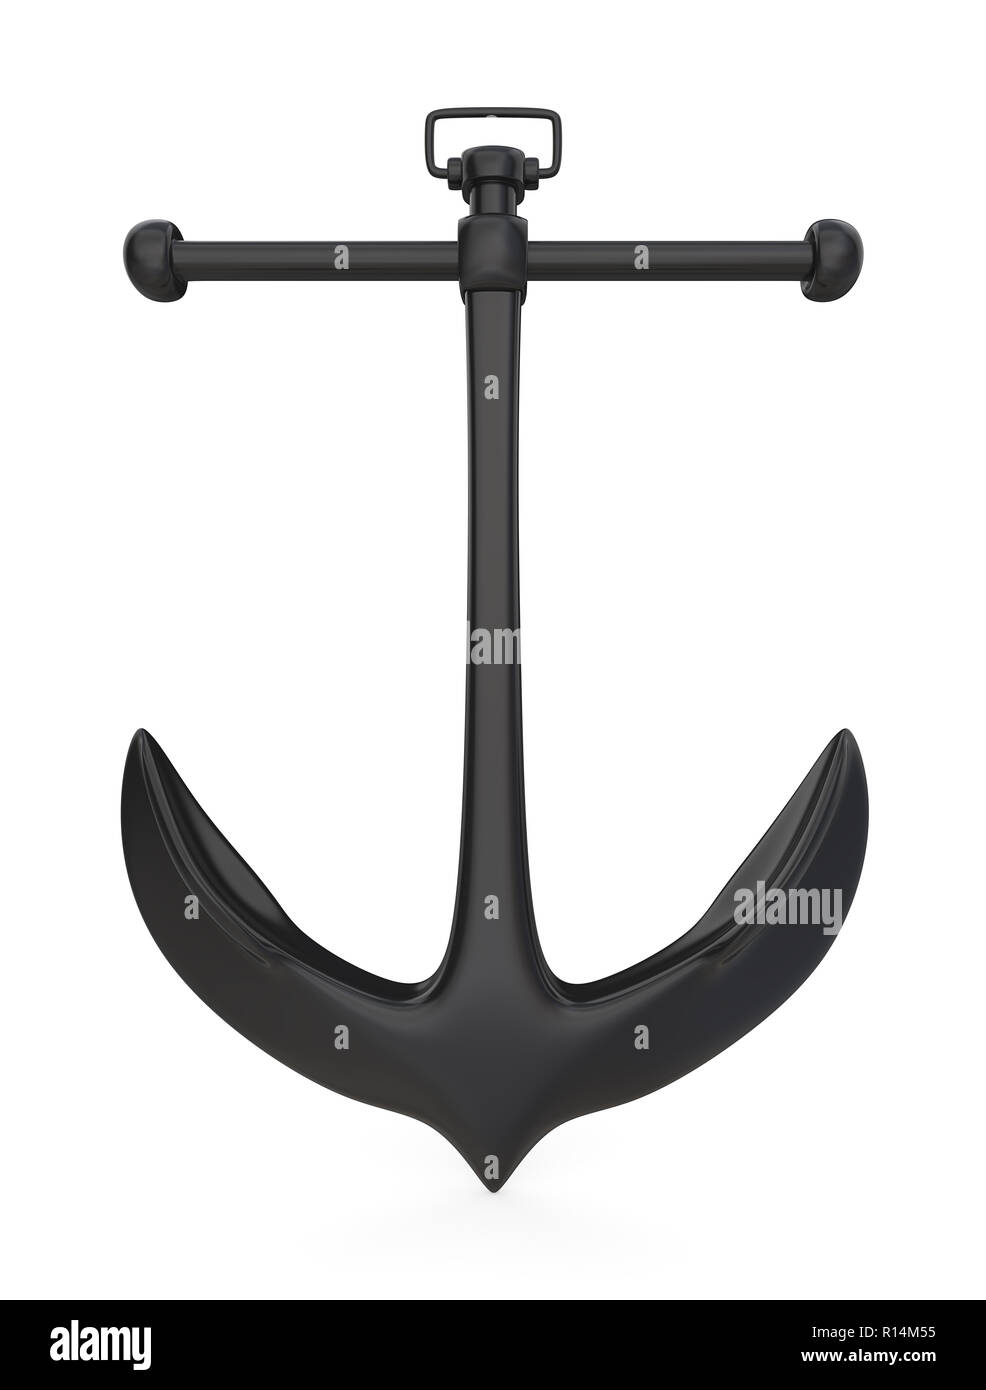 Vintage Anchor of rough steel on white background. Front view. 3D render. Stock Photo